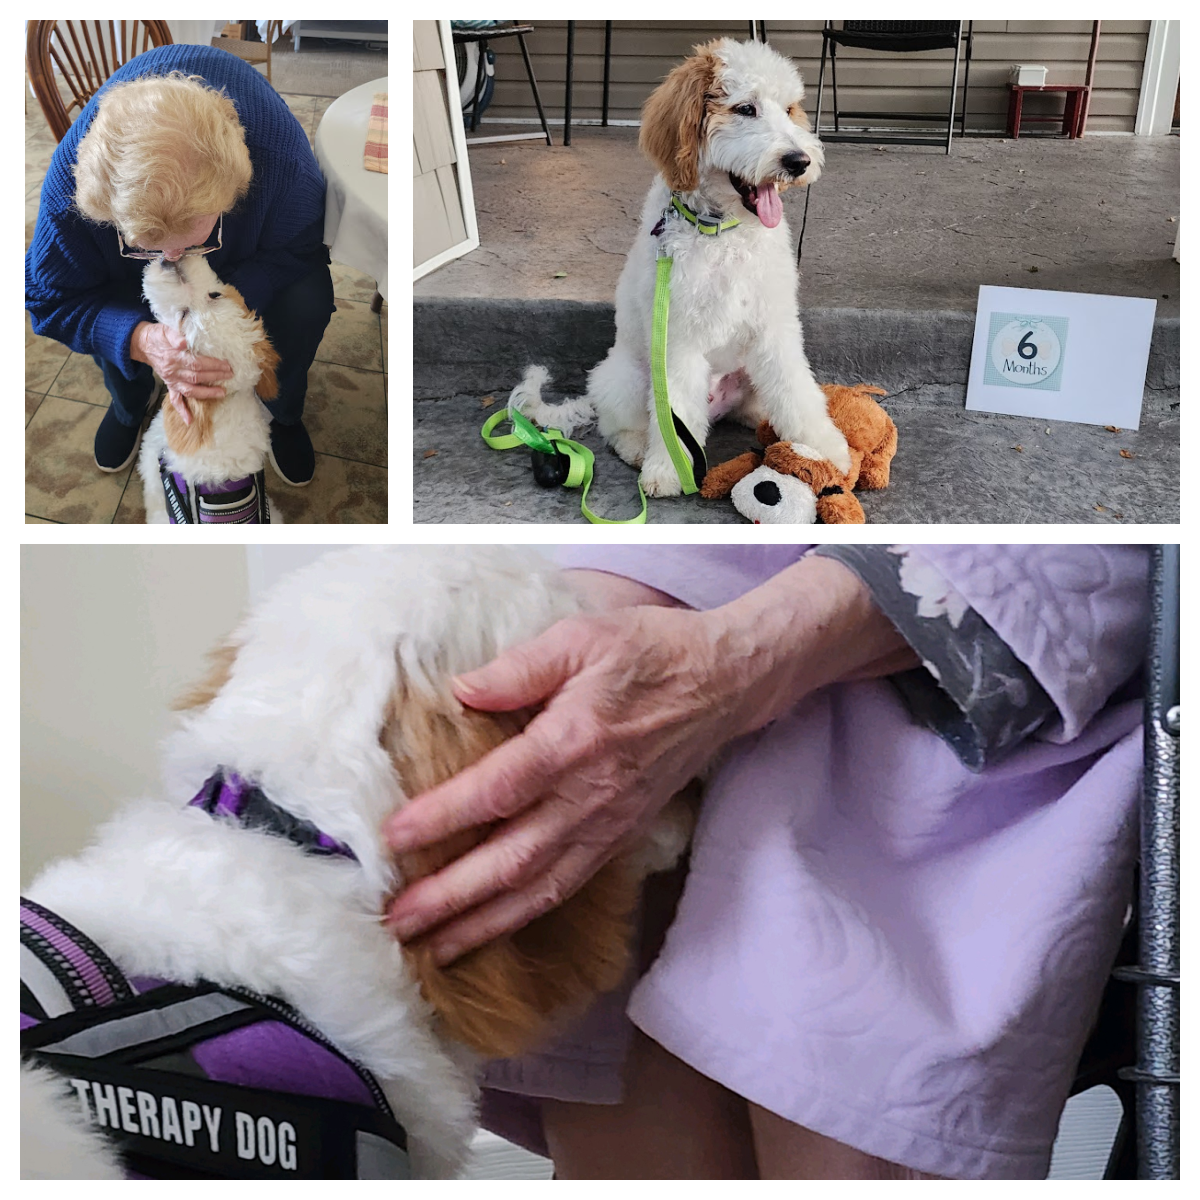 Aji is Elder Orphan Care's therapy dog in training